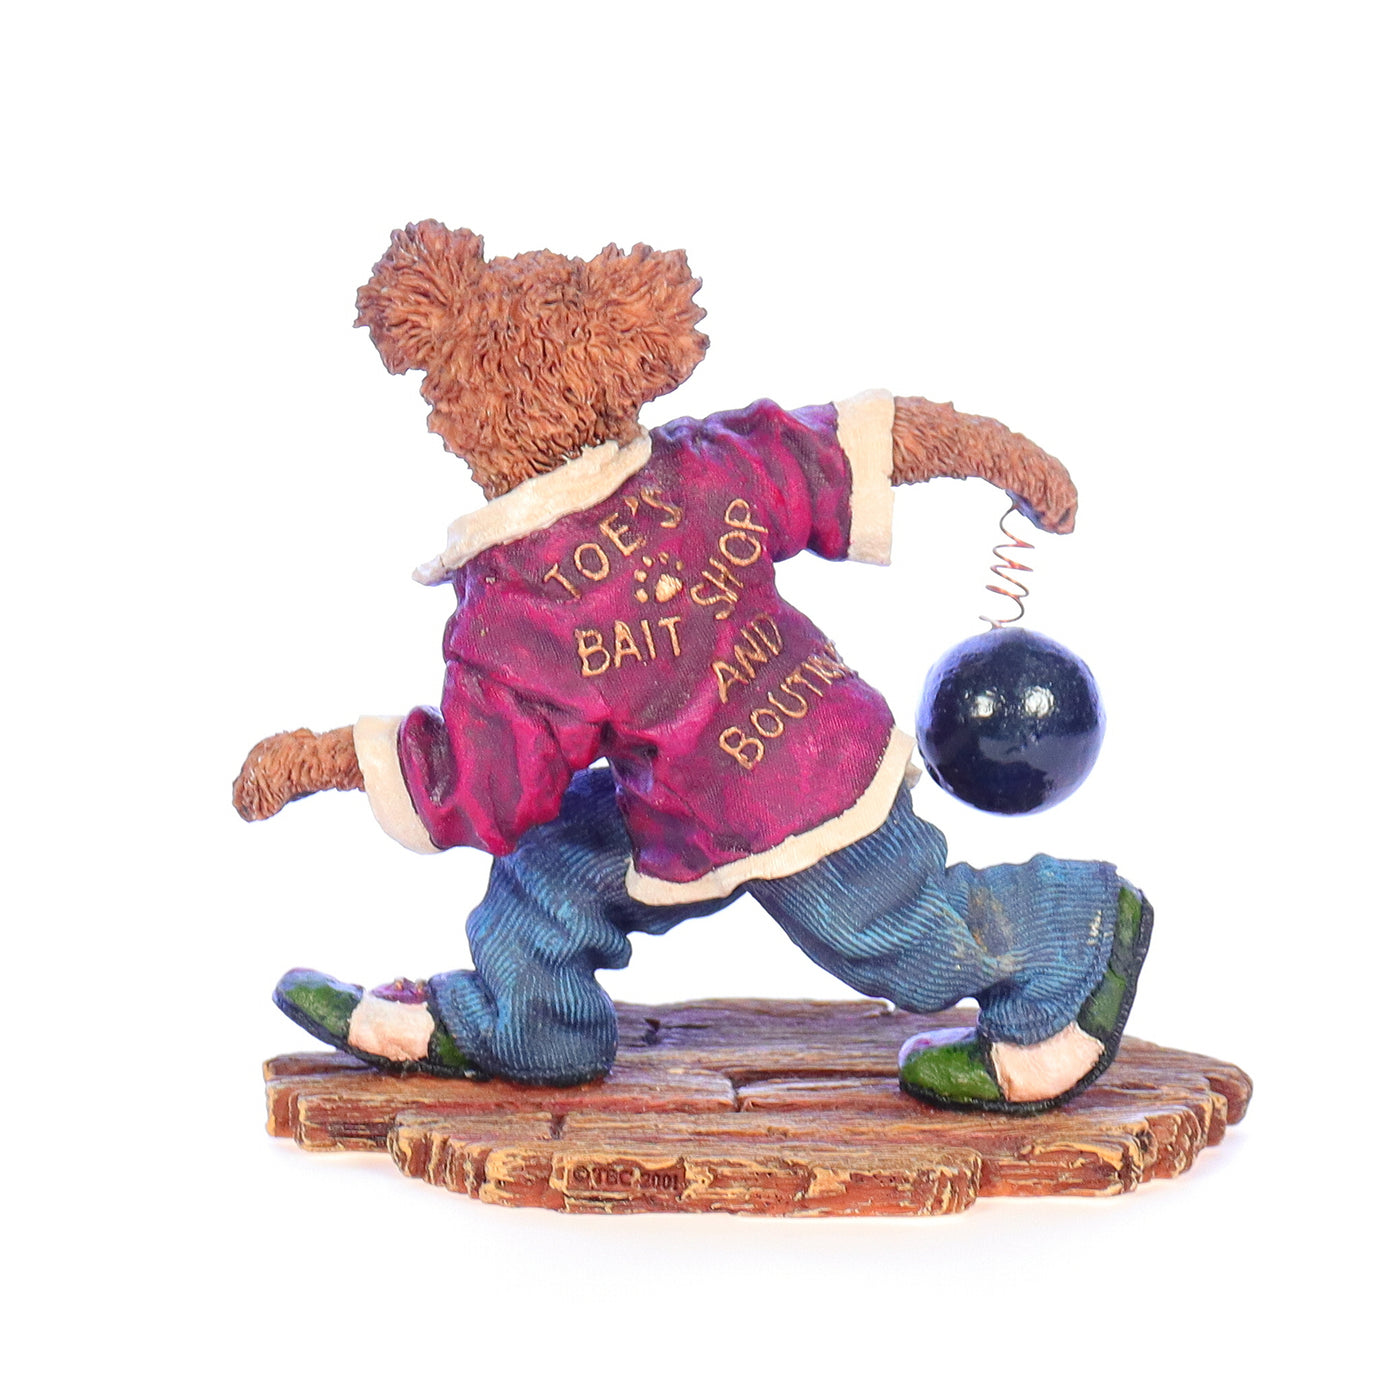 the bearstone collection 228358 strike mcspare  9 outa 10 aint bad sports figurine 2001 back